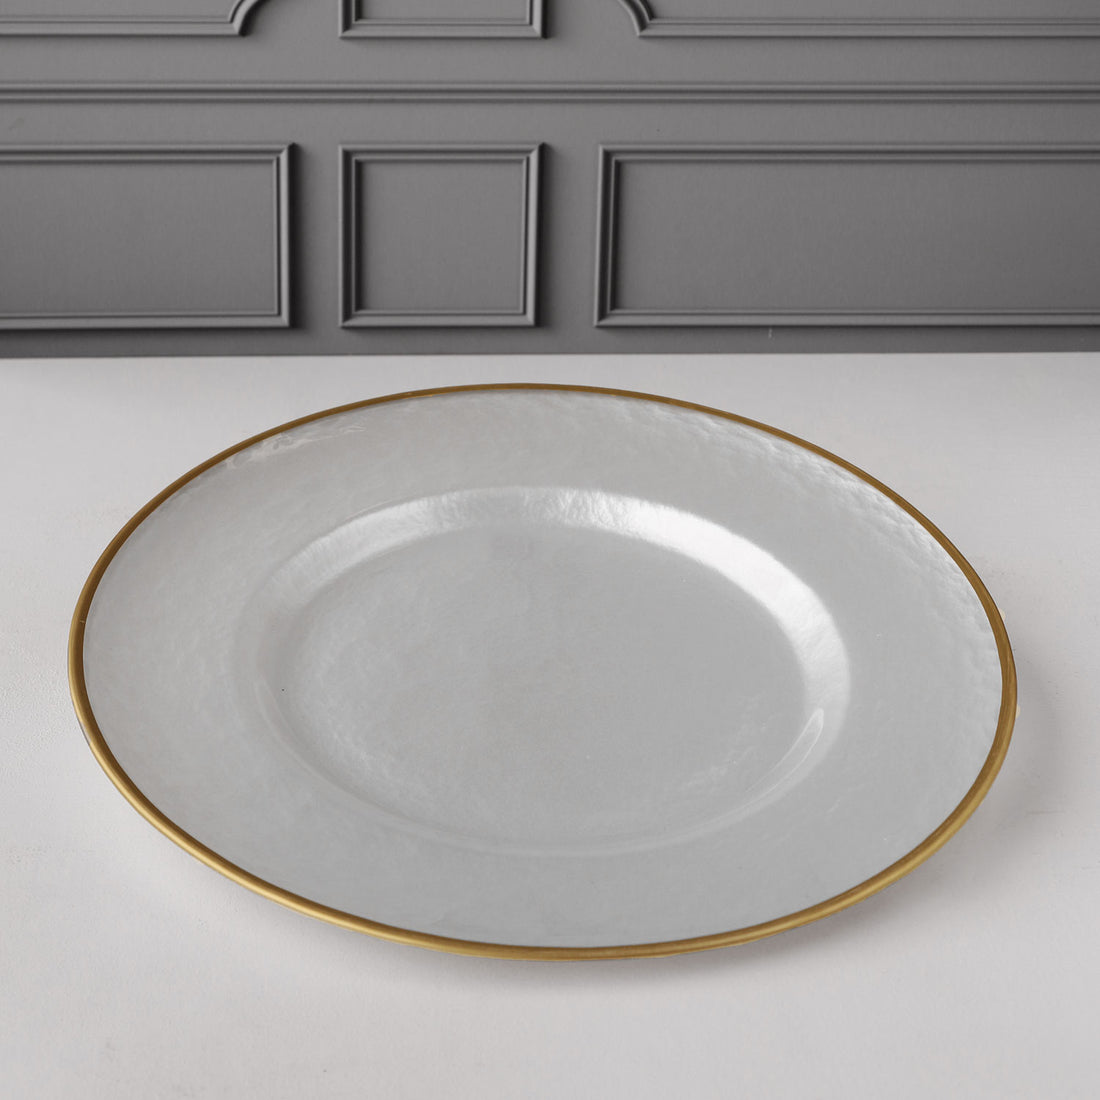 GLASS White Opalescent Charger Plate with Gold Rim (White and Gold)